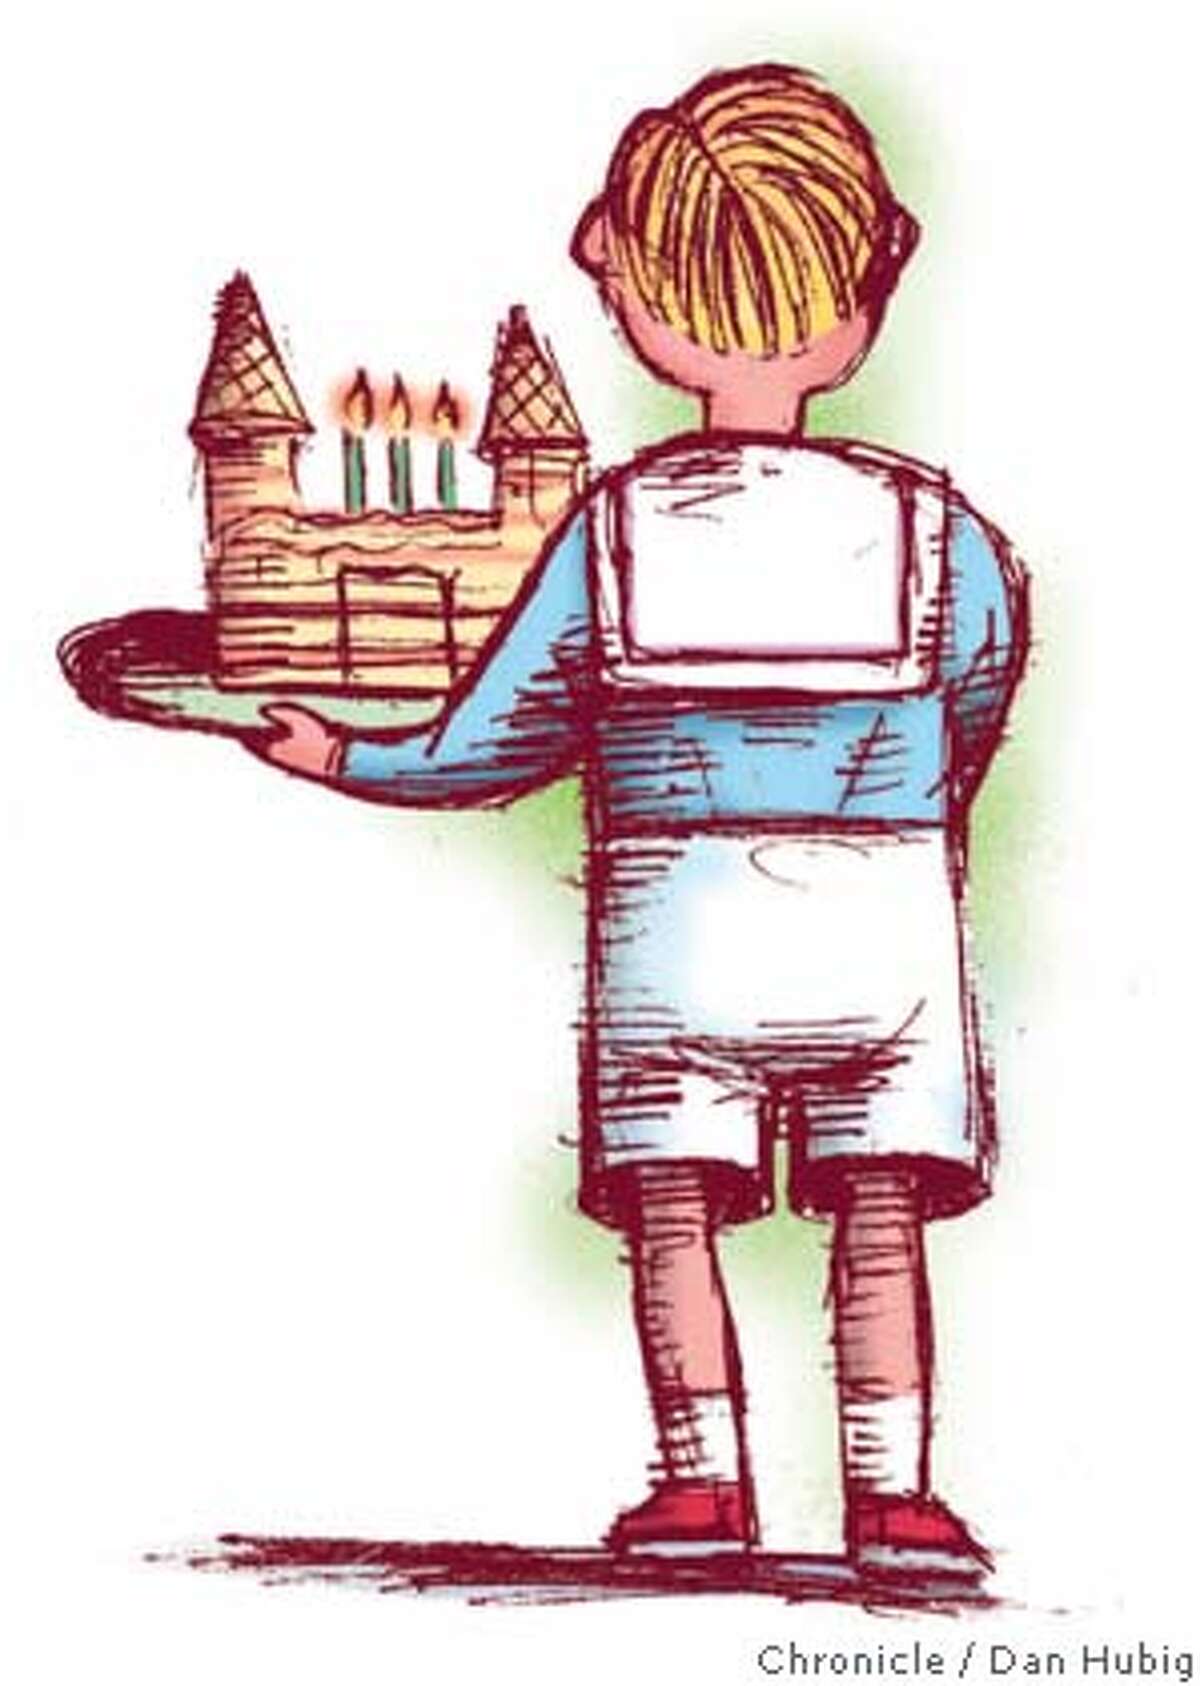 The Enchanted Castle: When baking becomes bonding. Chronicle illustration by Dan Hubig